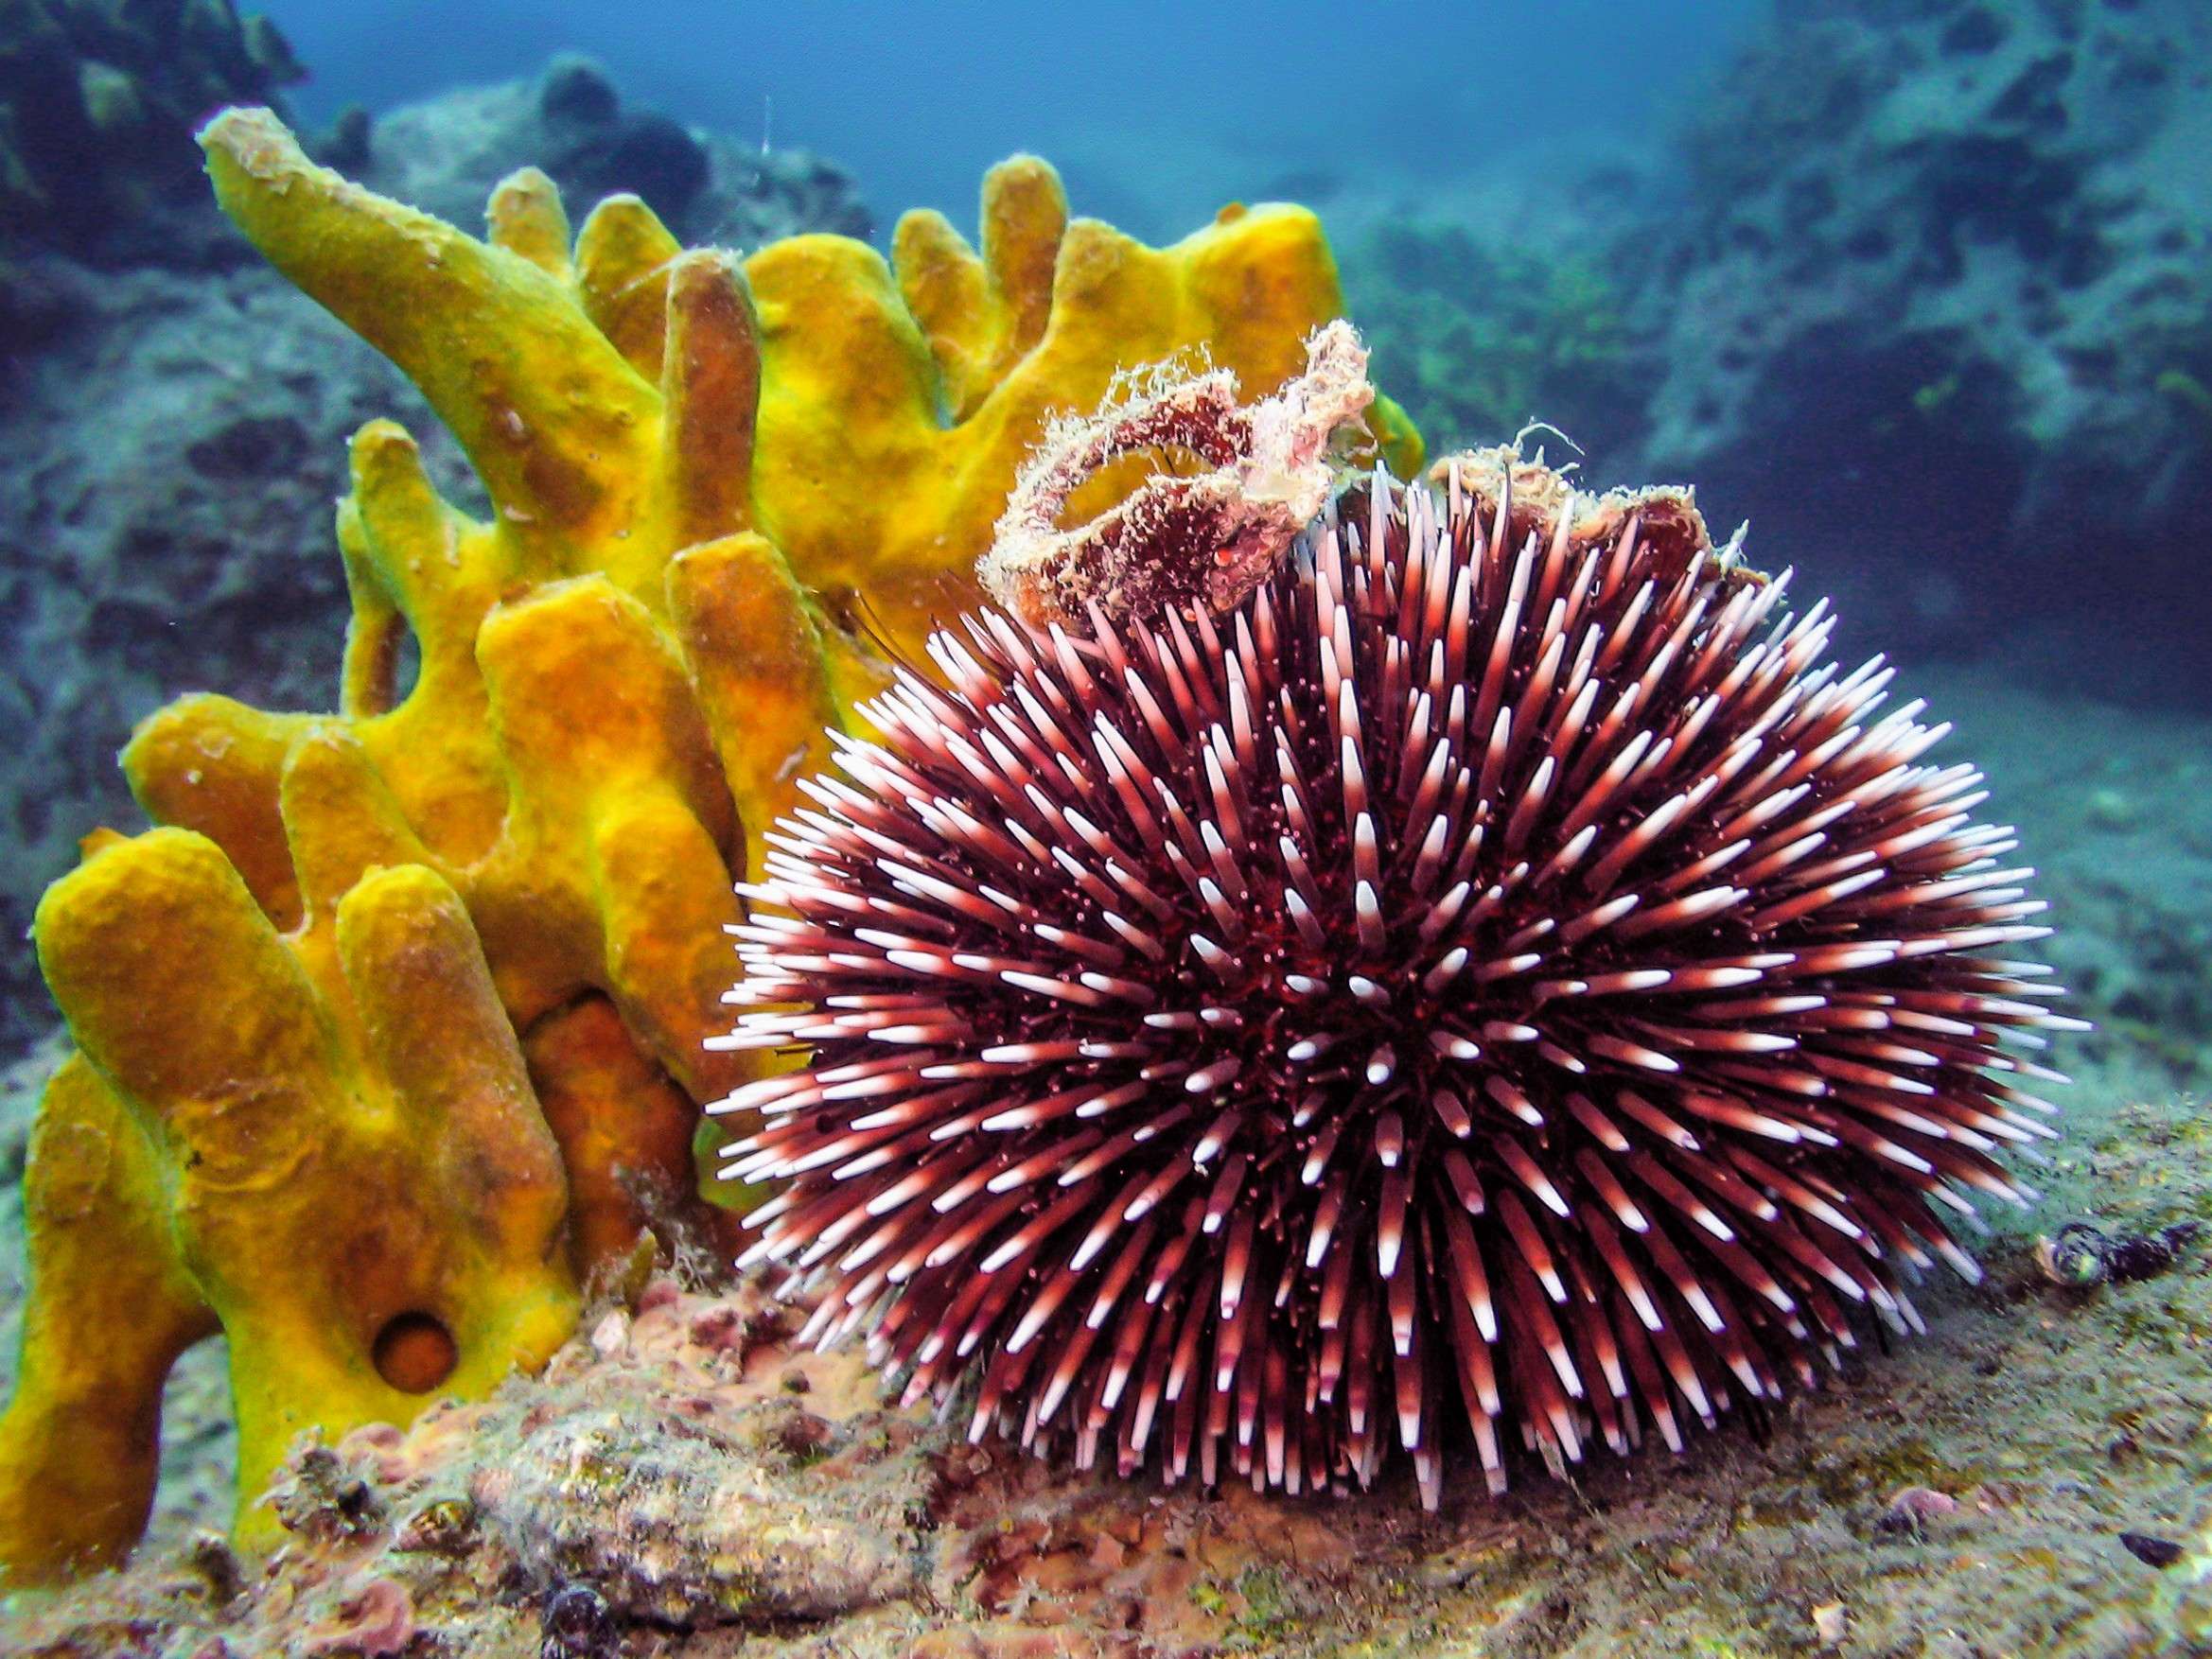 Do Sea Urchins Have Brains
